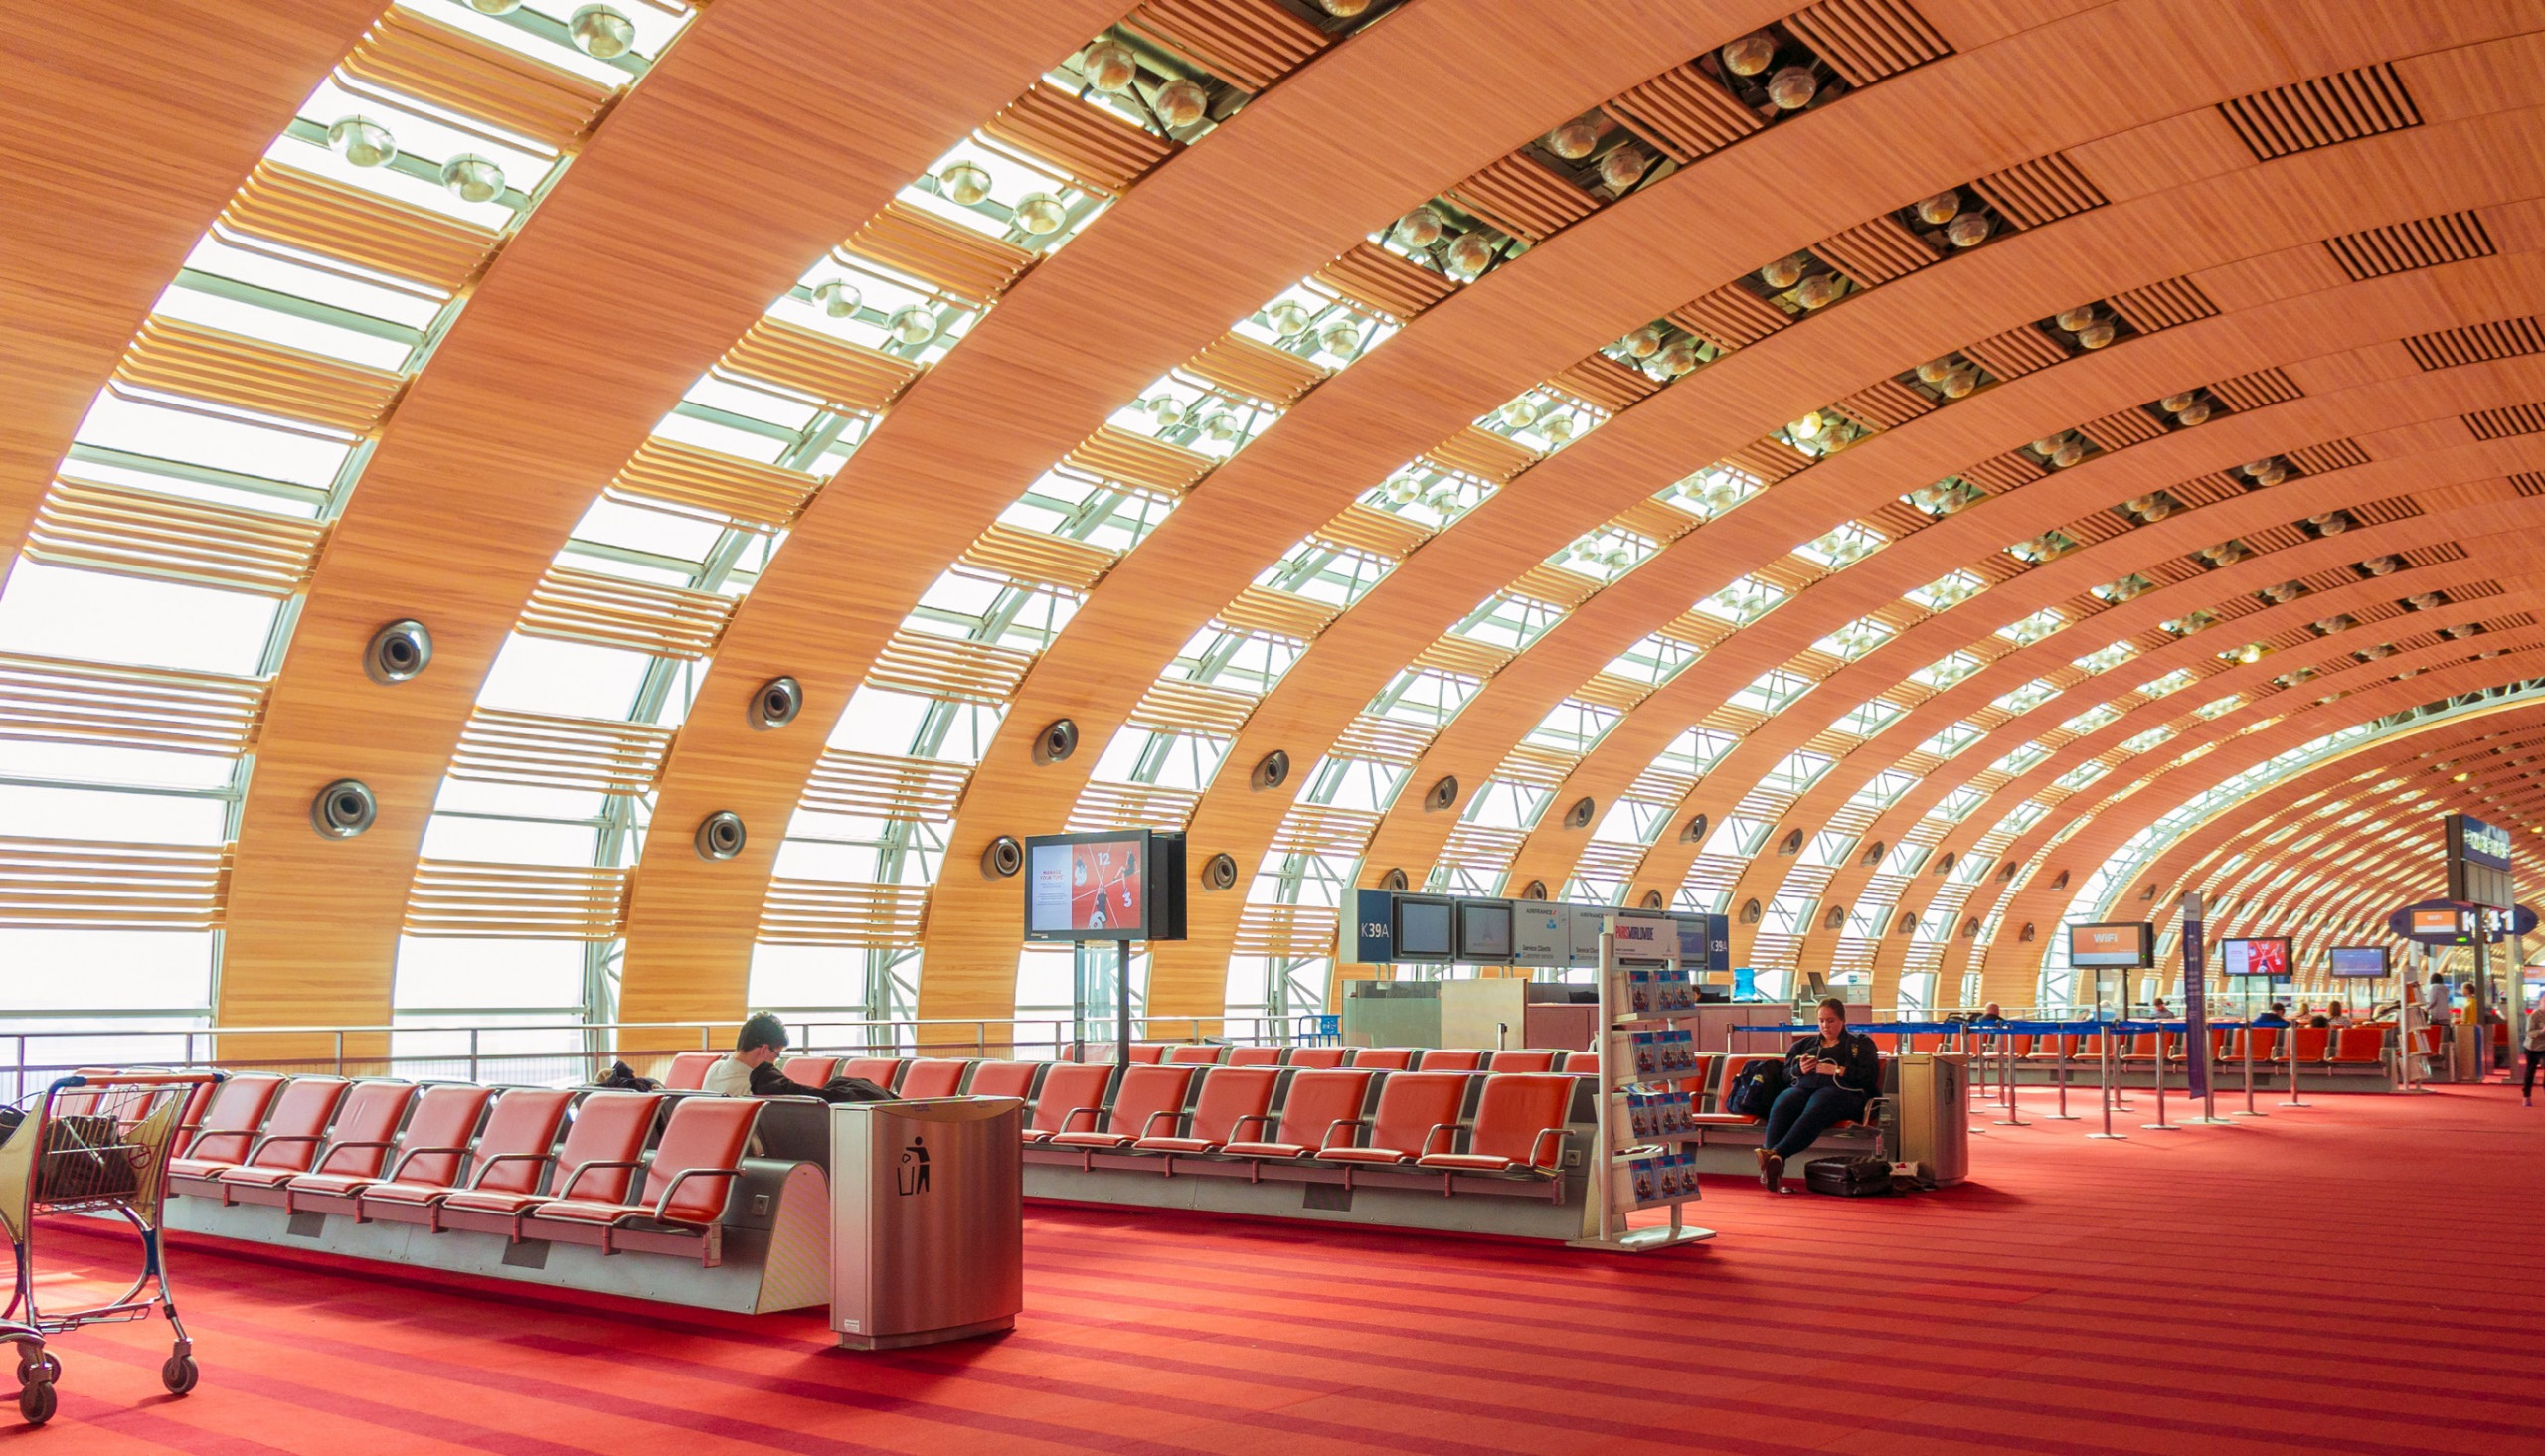 Design experience: Charles de Gaulle Airport